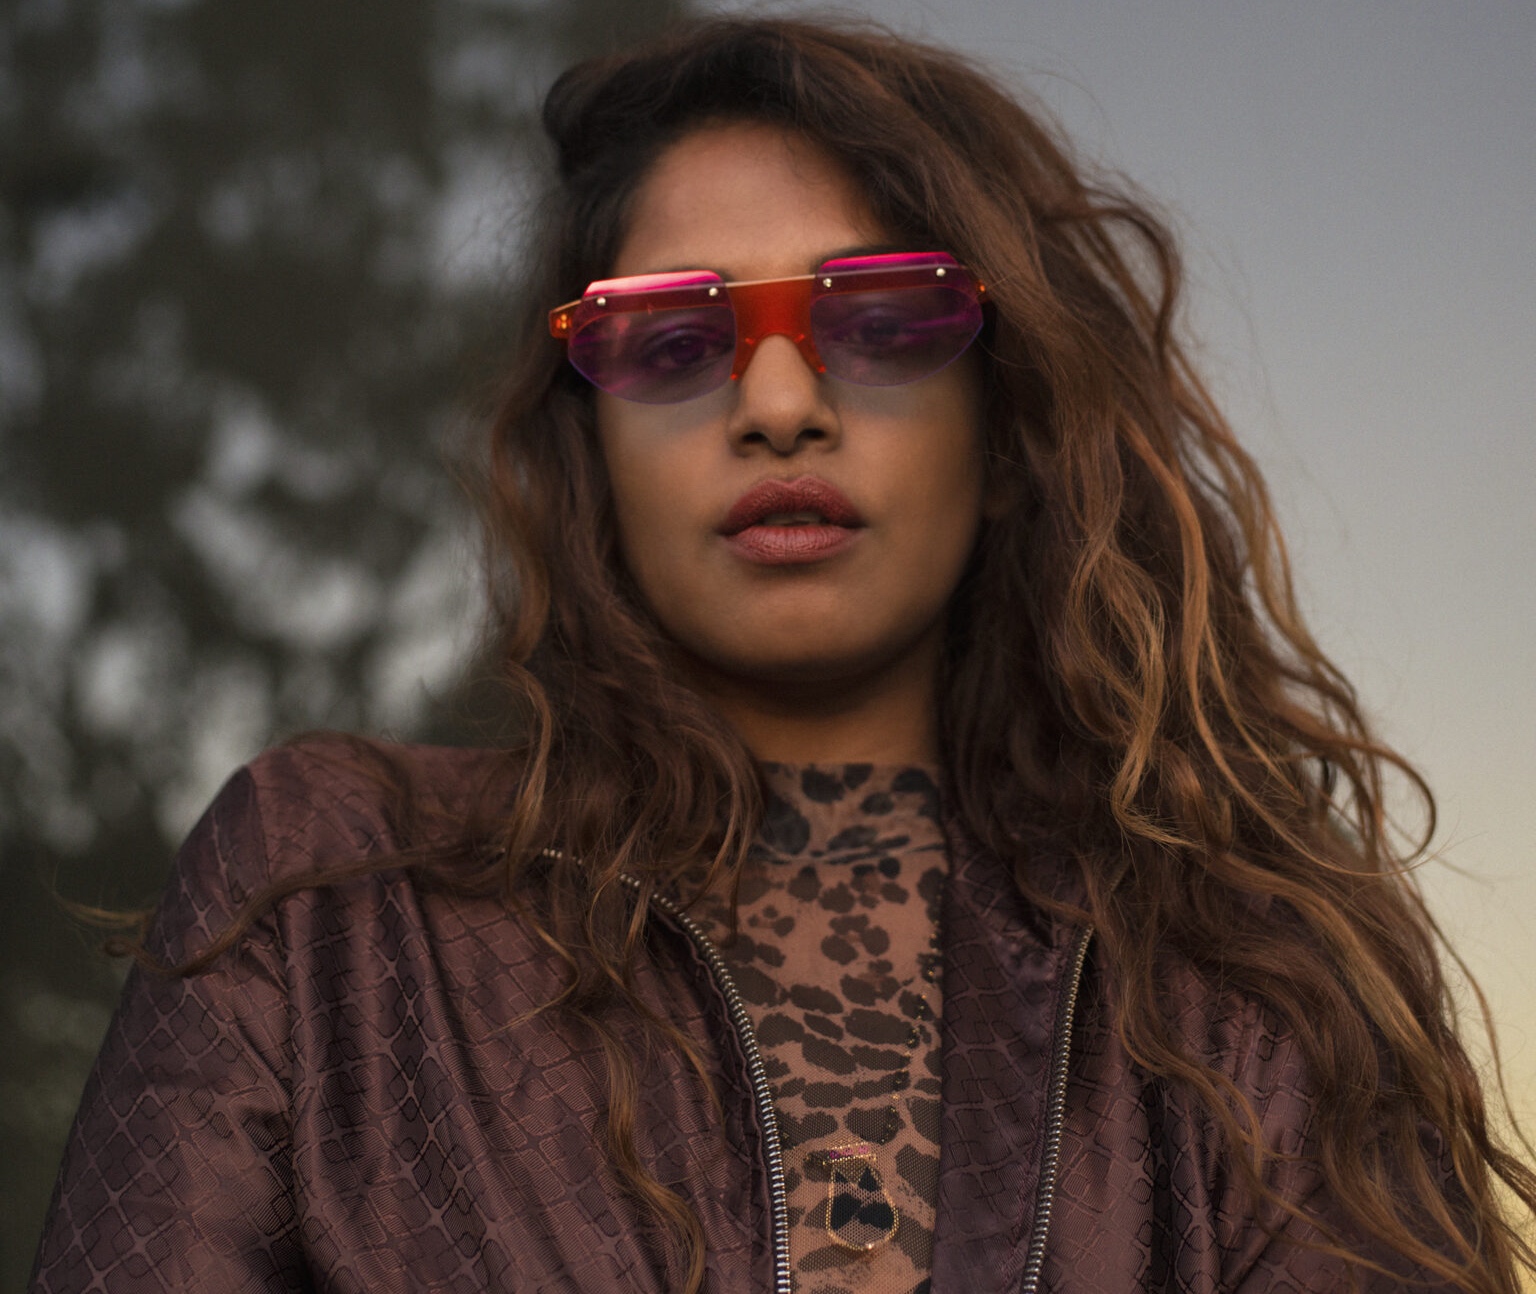 M.I.A Drops New Single, ‘The One’ and Announces her Upcoming Album After Spiritual Awakening